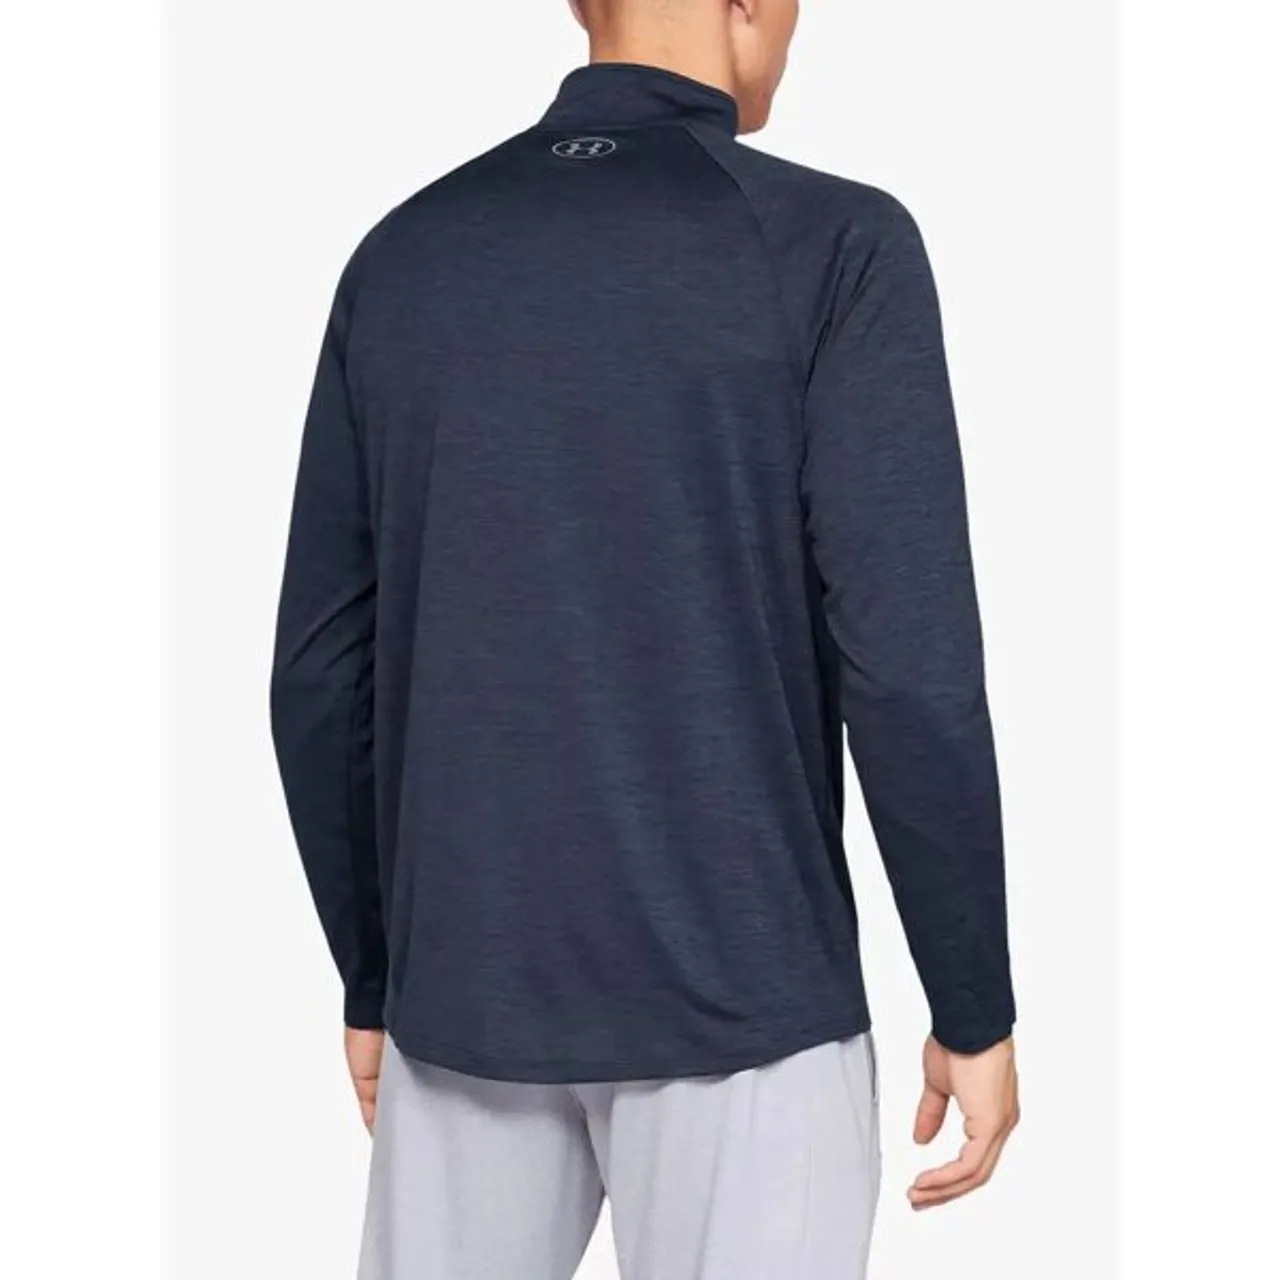 Under Armour Tech 2.0 1/2 Zip Long Sleeve Gym Top - Navy - Male